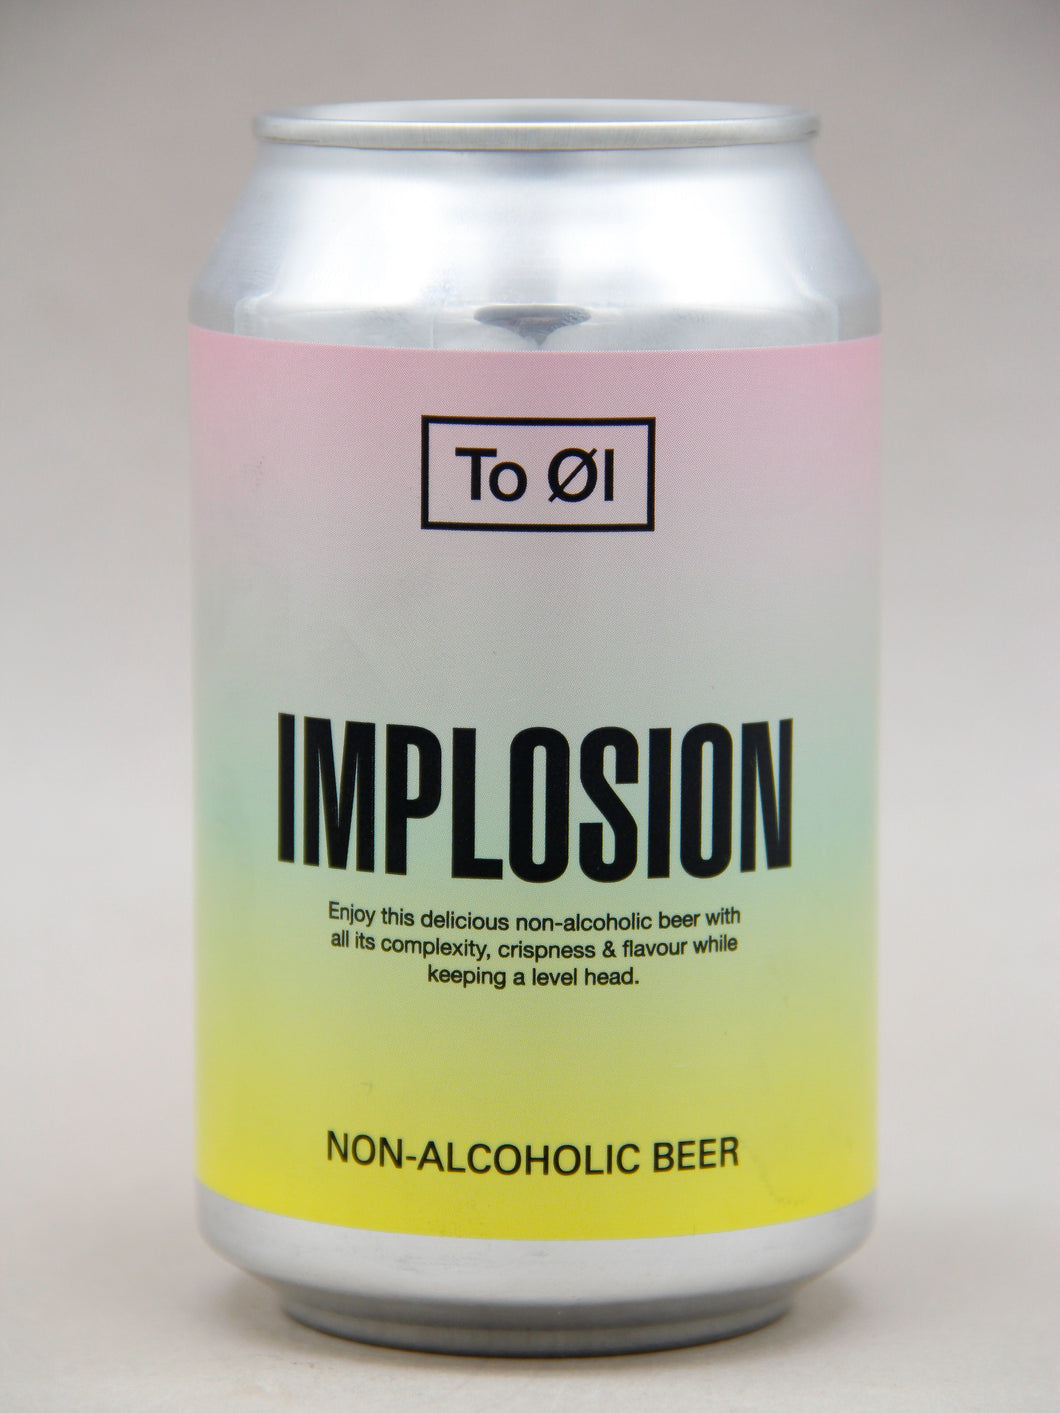 To Øl: Implosion, Non-Alcoholic Beer (0.3%, 33cl CAN)